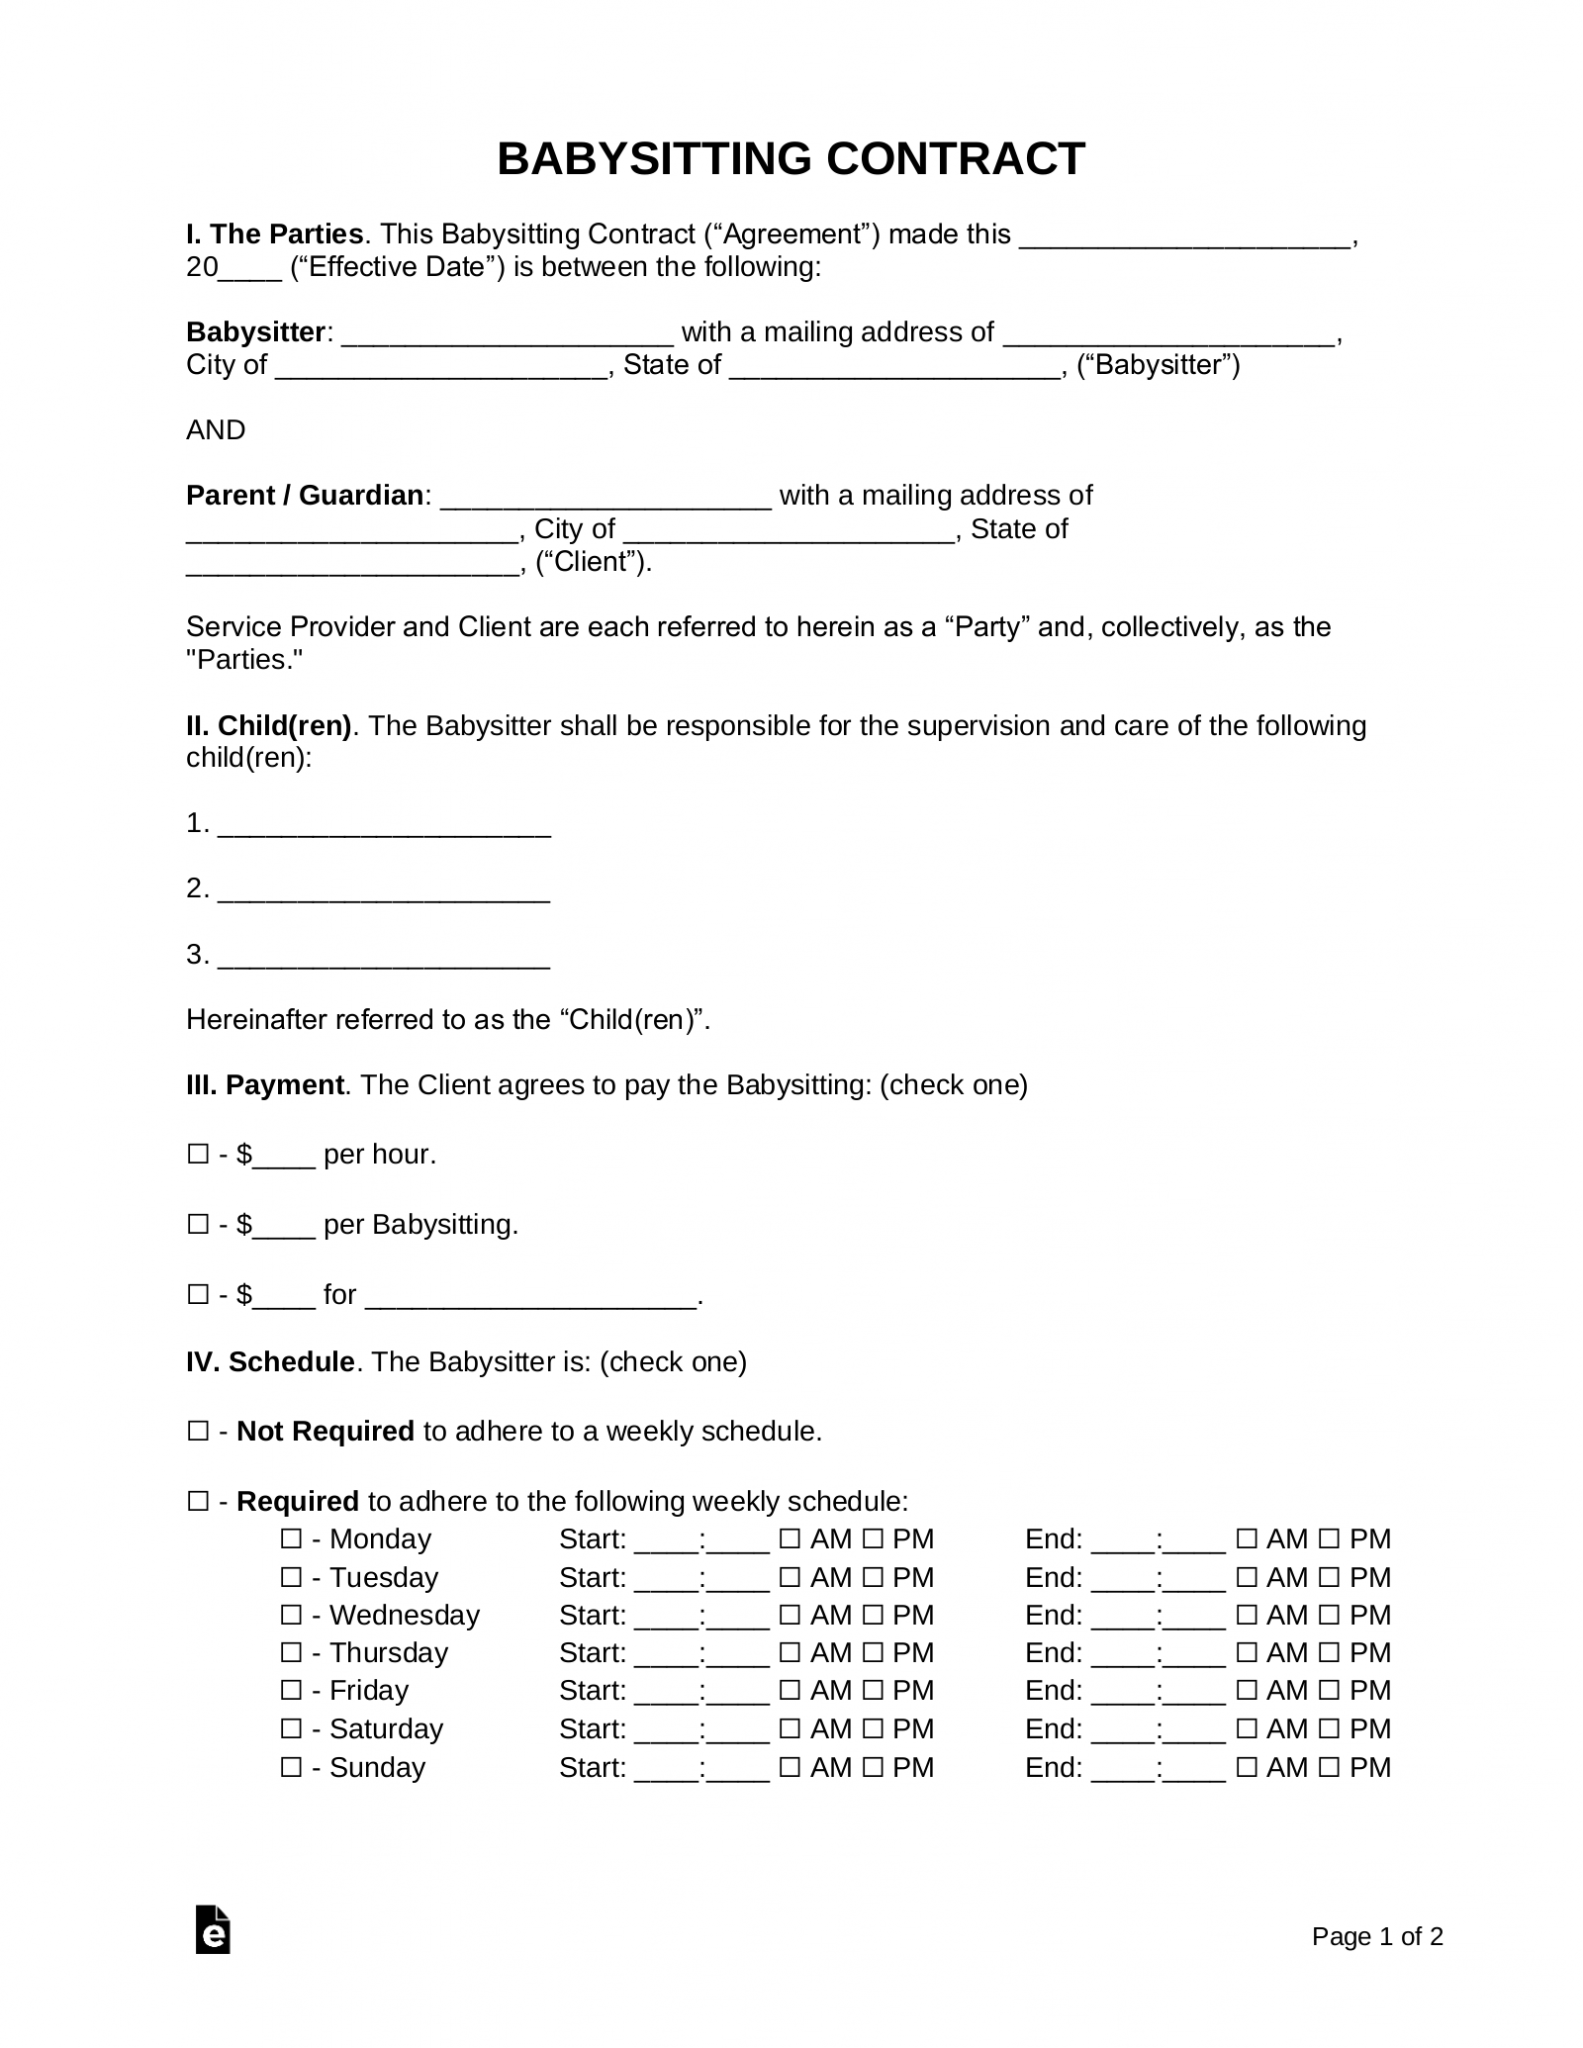 Babysitting Contract Template